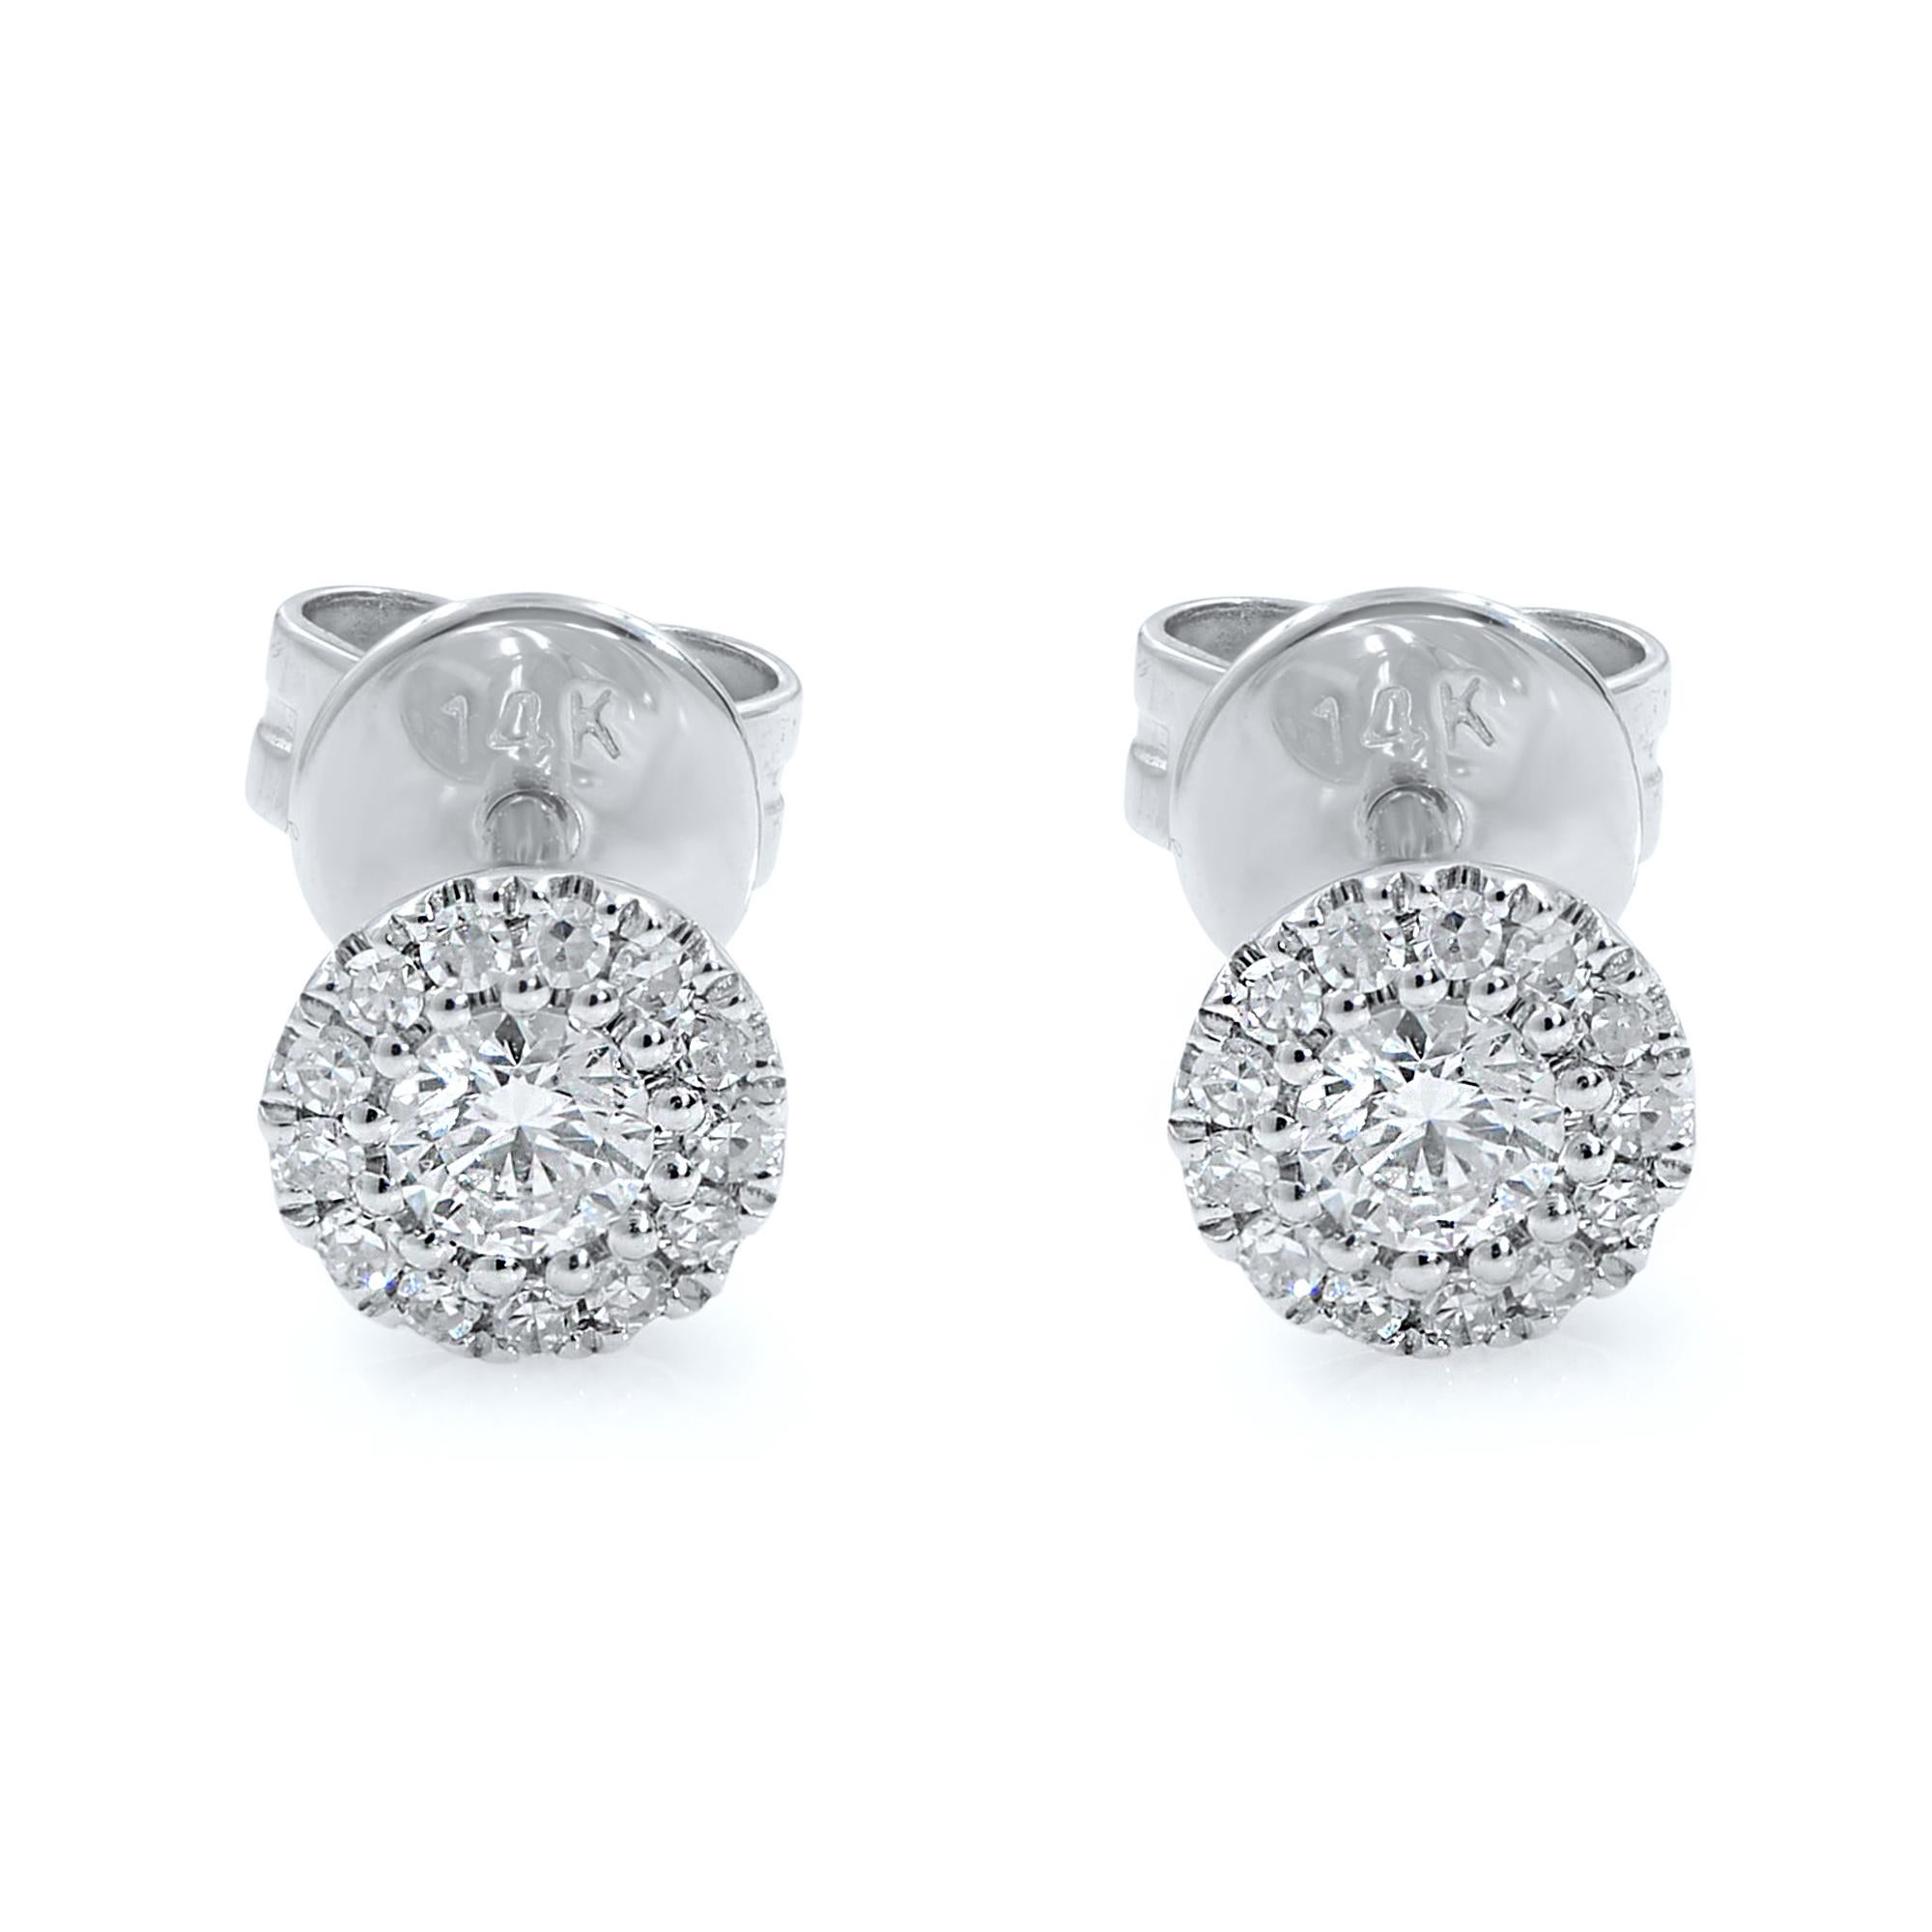 Petite diamond stud earrings that can be worn next to each other or in each ear. This is a great bridal gift, birthday gift and just a gift for yourself. 
Diamonds: 0.24cts in carat weight
Quality: G-H color, VS clarity 
Backings: Push backs
Earring